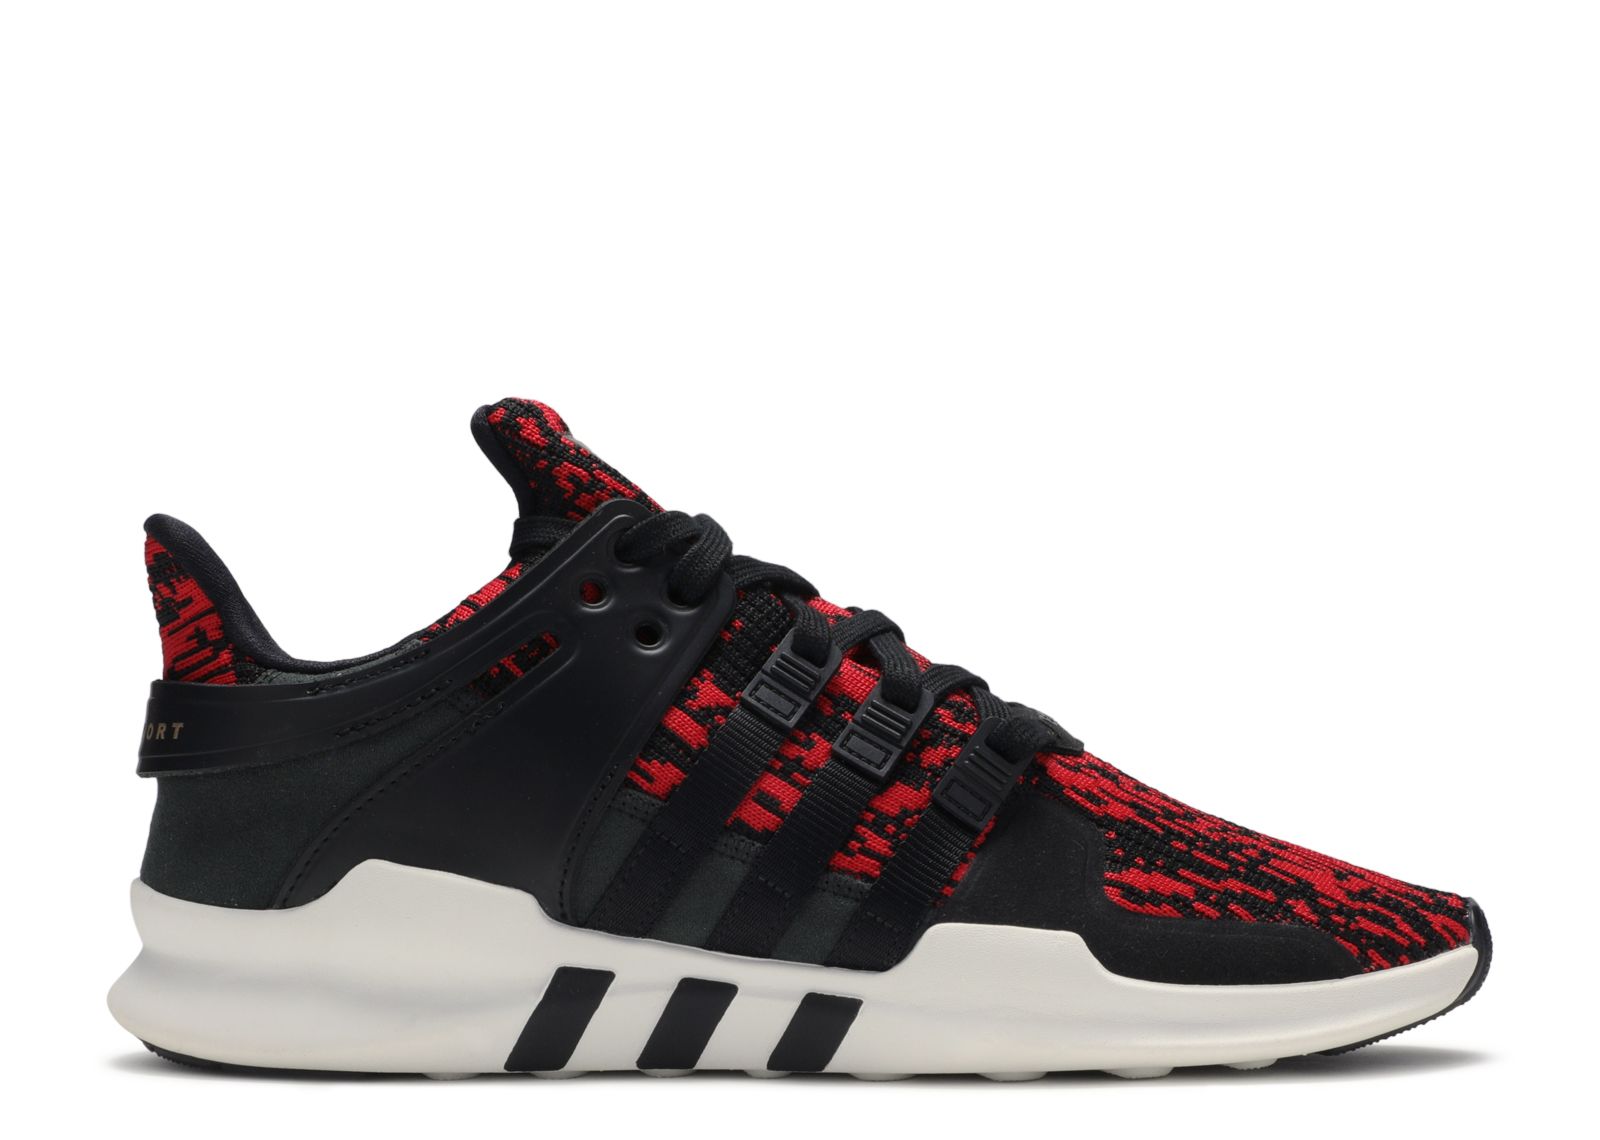 adidas eqt support adv red black